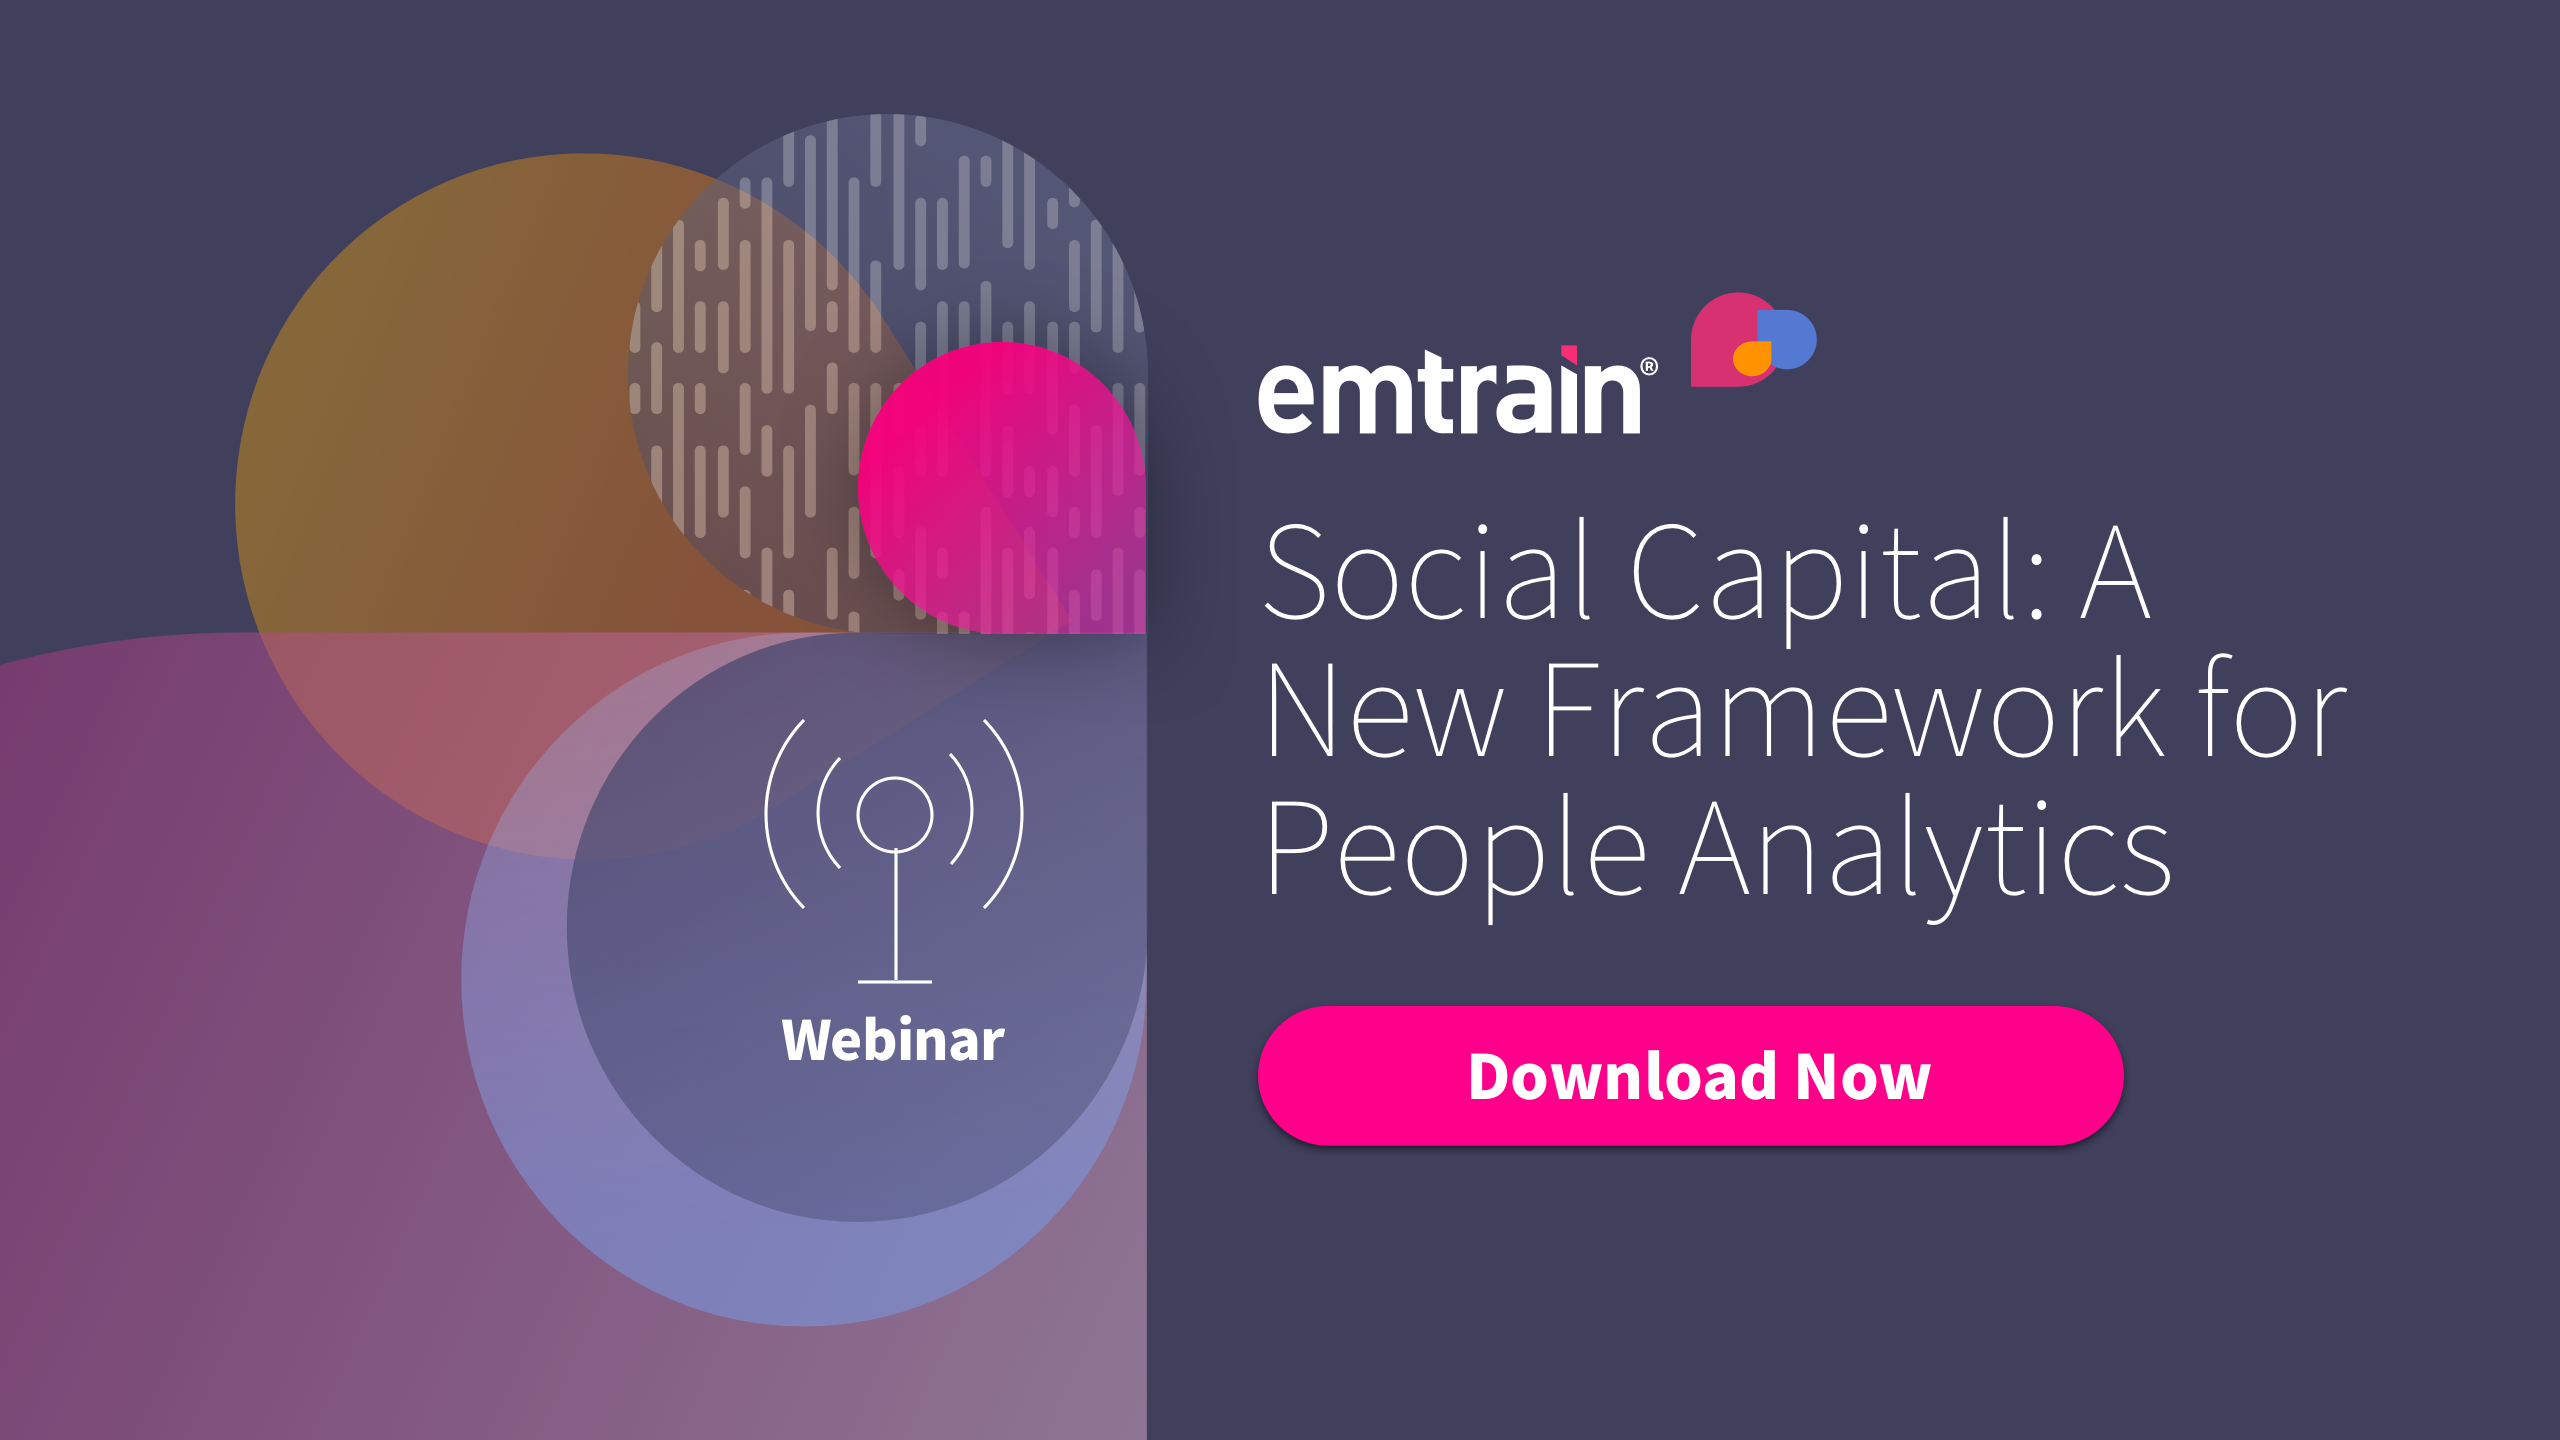 Social Capital: A New Framework for People Analytics